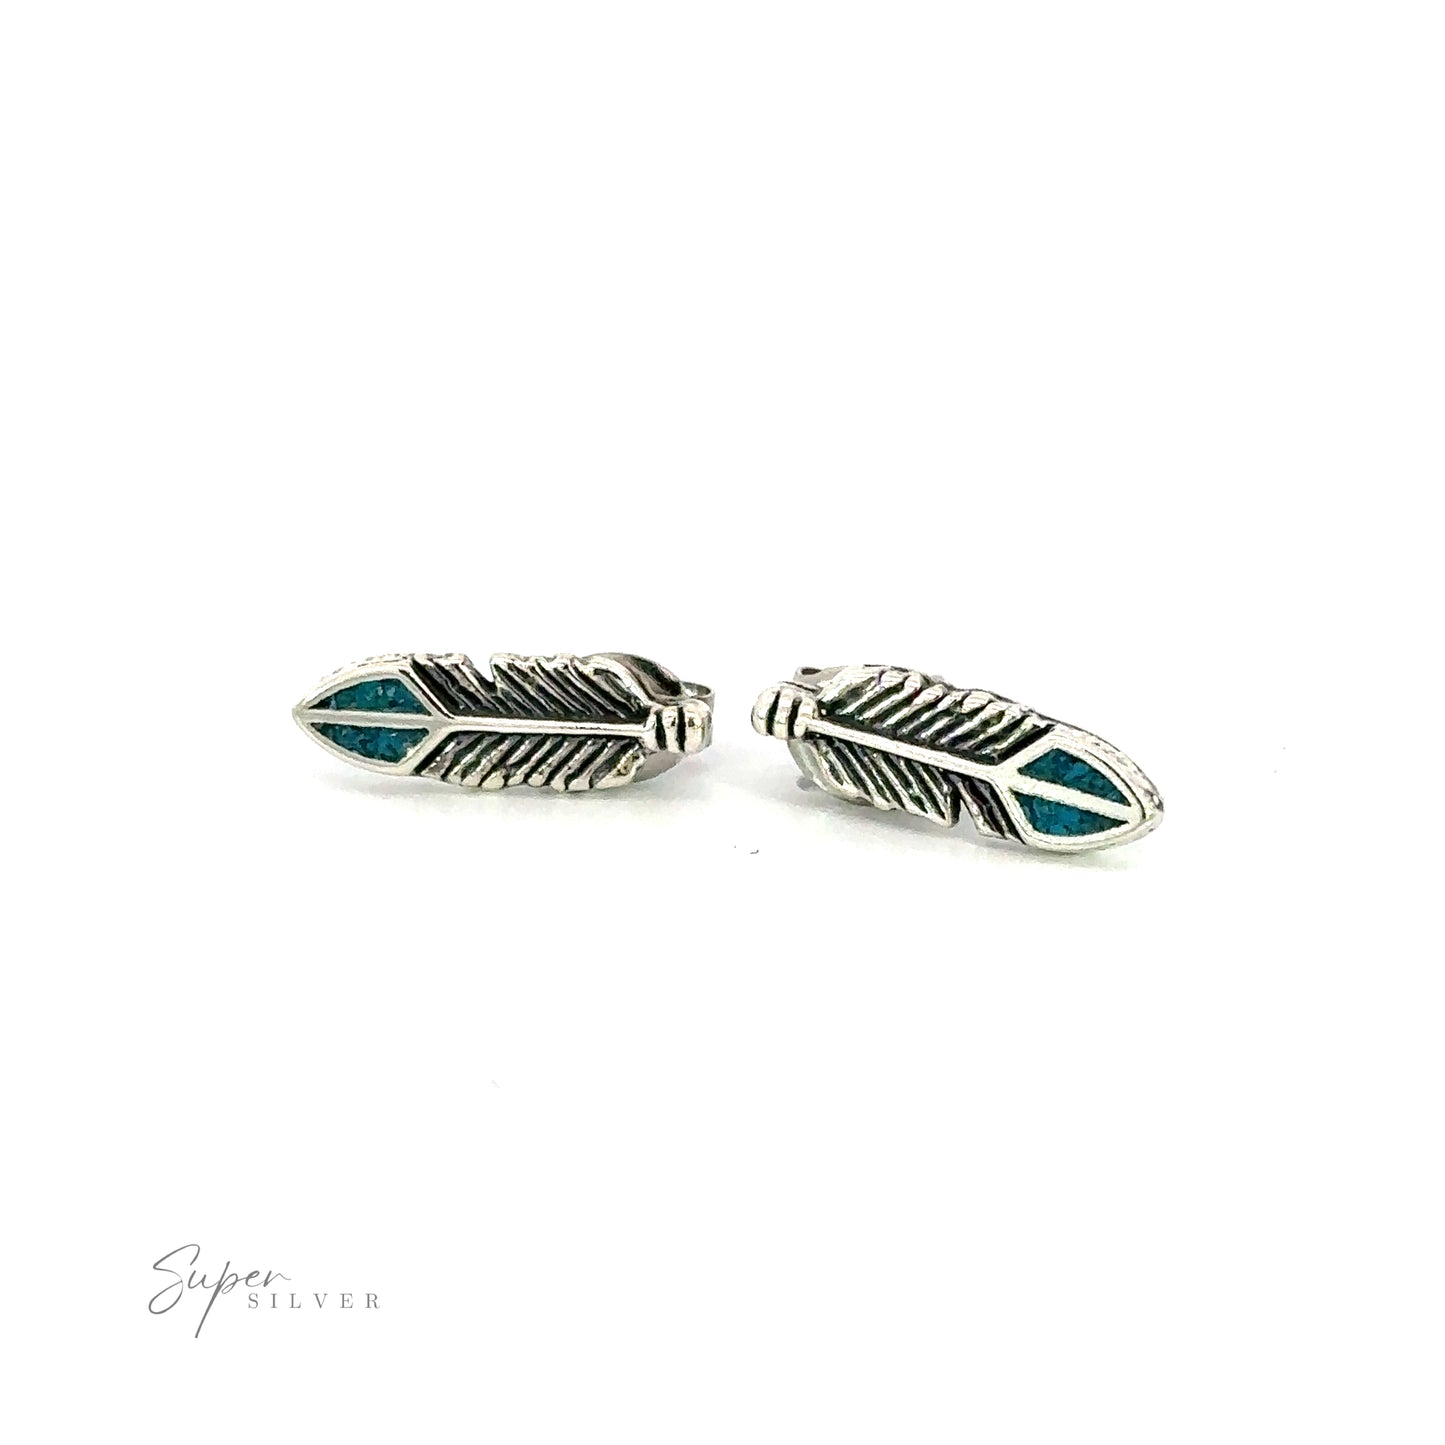 These southwestern-inspired Feather Studs with Turquoise feature vibrant turquoise accents.